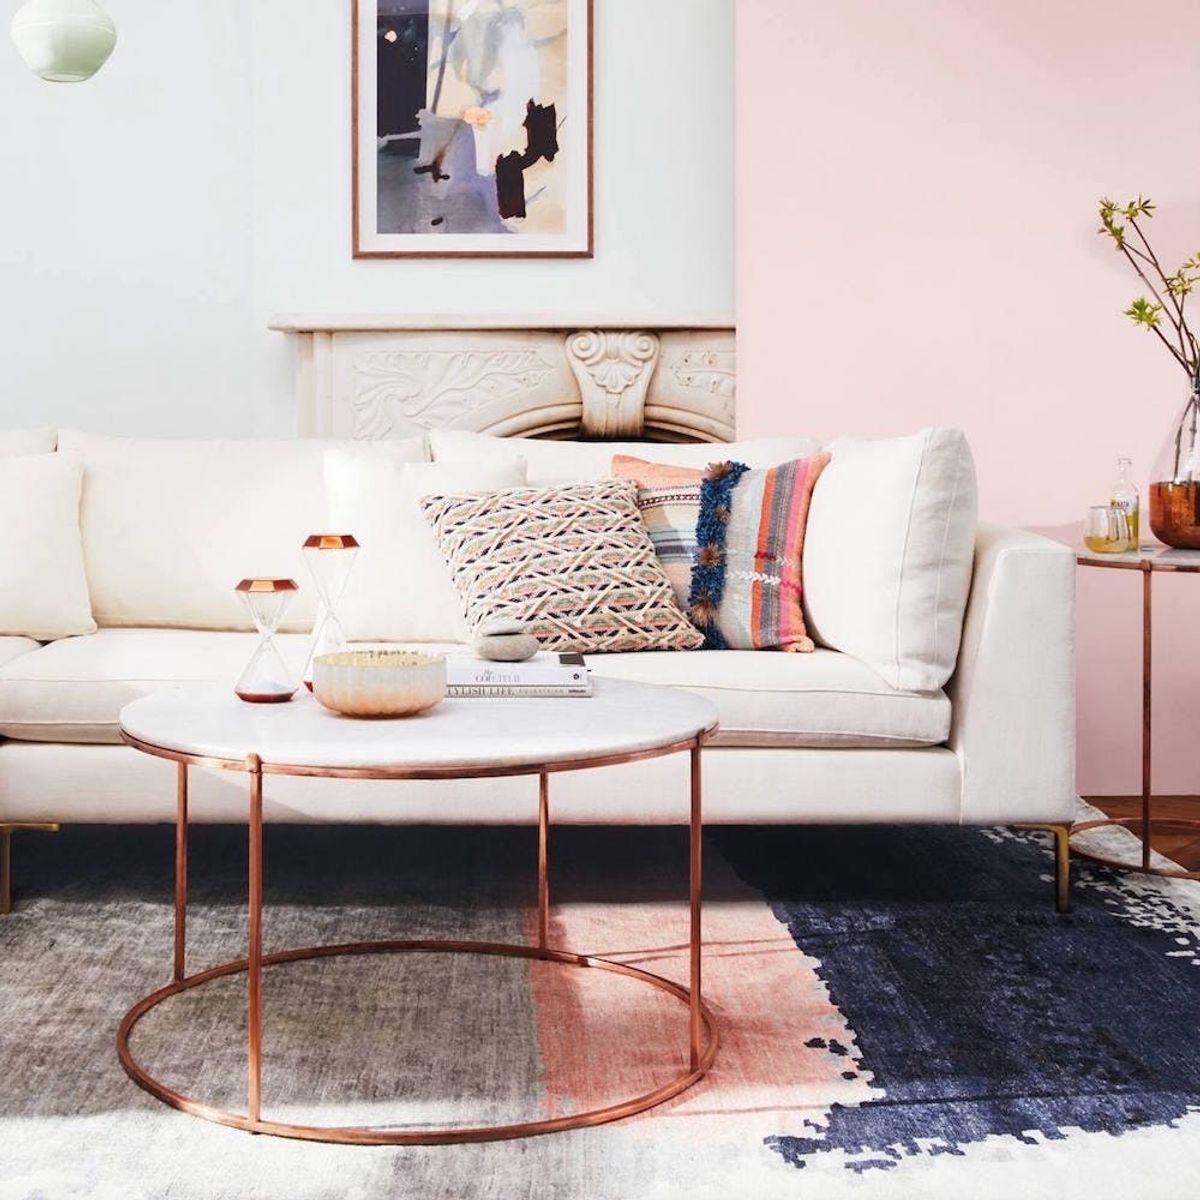 Anthropologie’s June Home Lookbook Is Full of Those Summertime Vibes